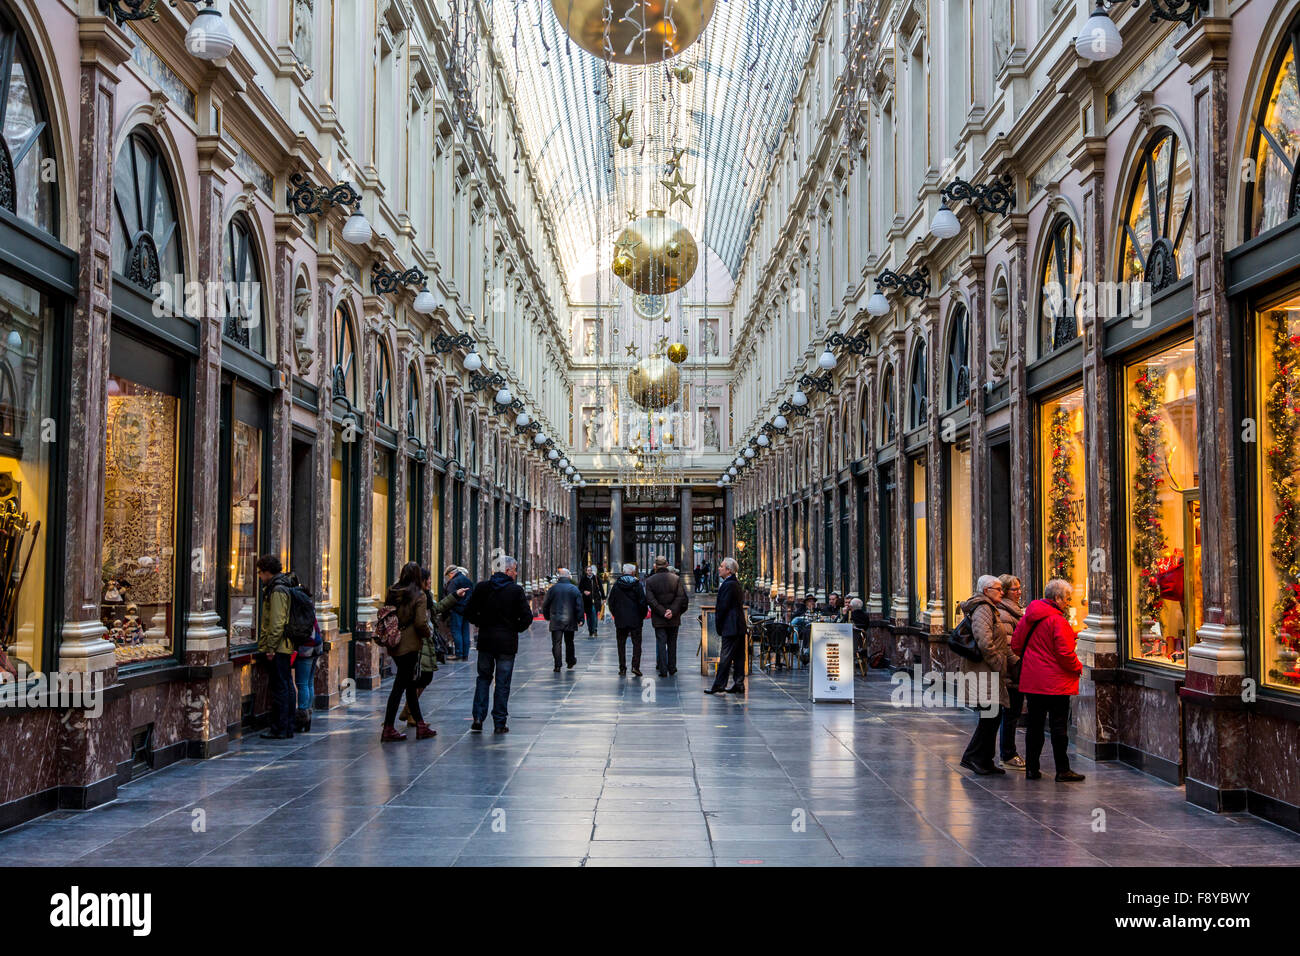 Historic shopping mall in the old town,  Galerie de la Reine, Brussels, Belgium, Stock Photo